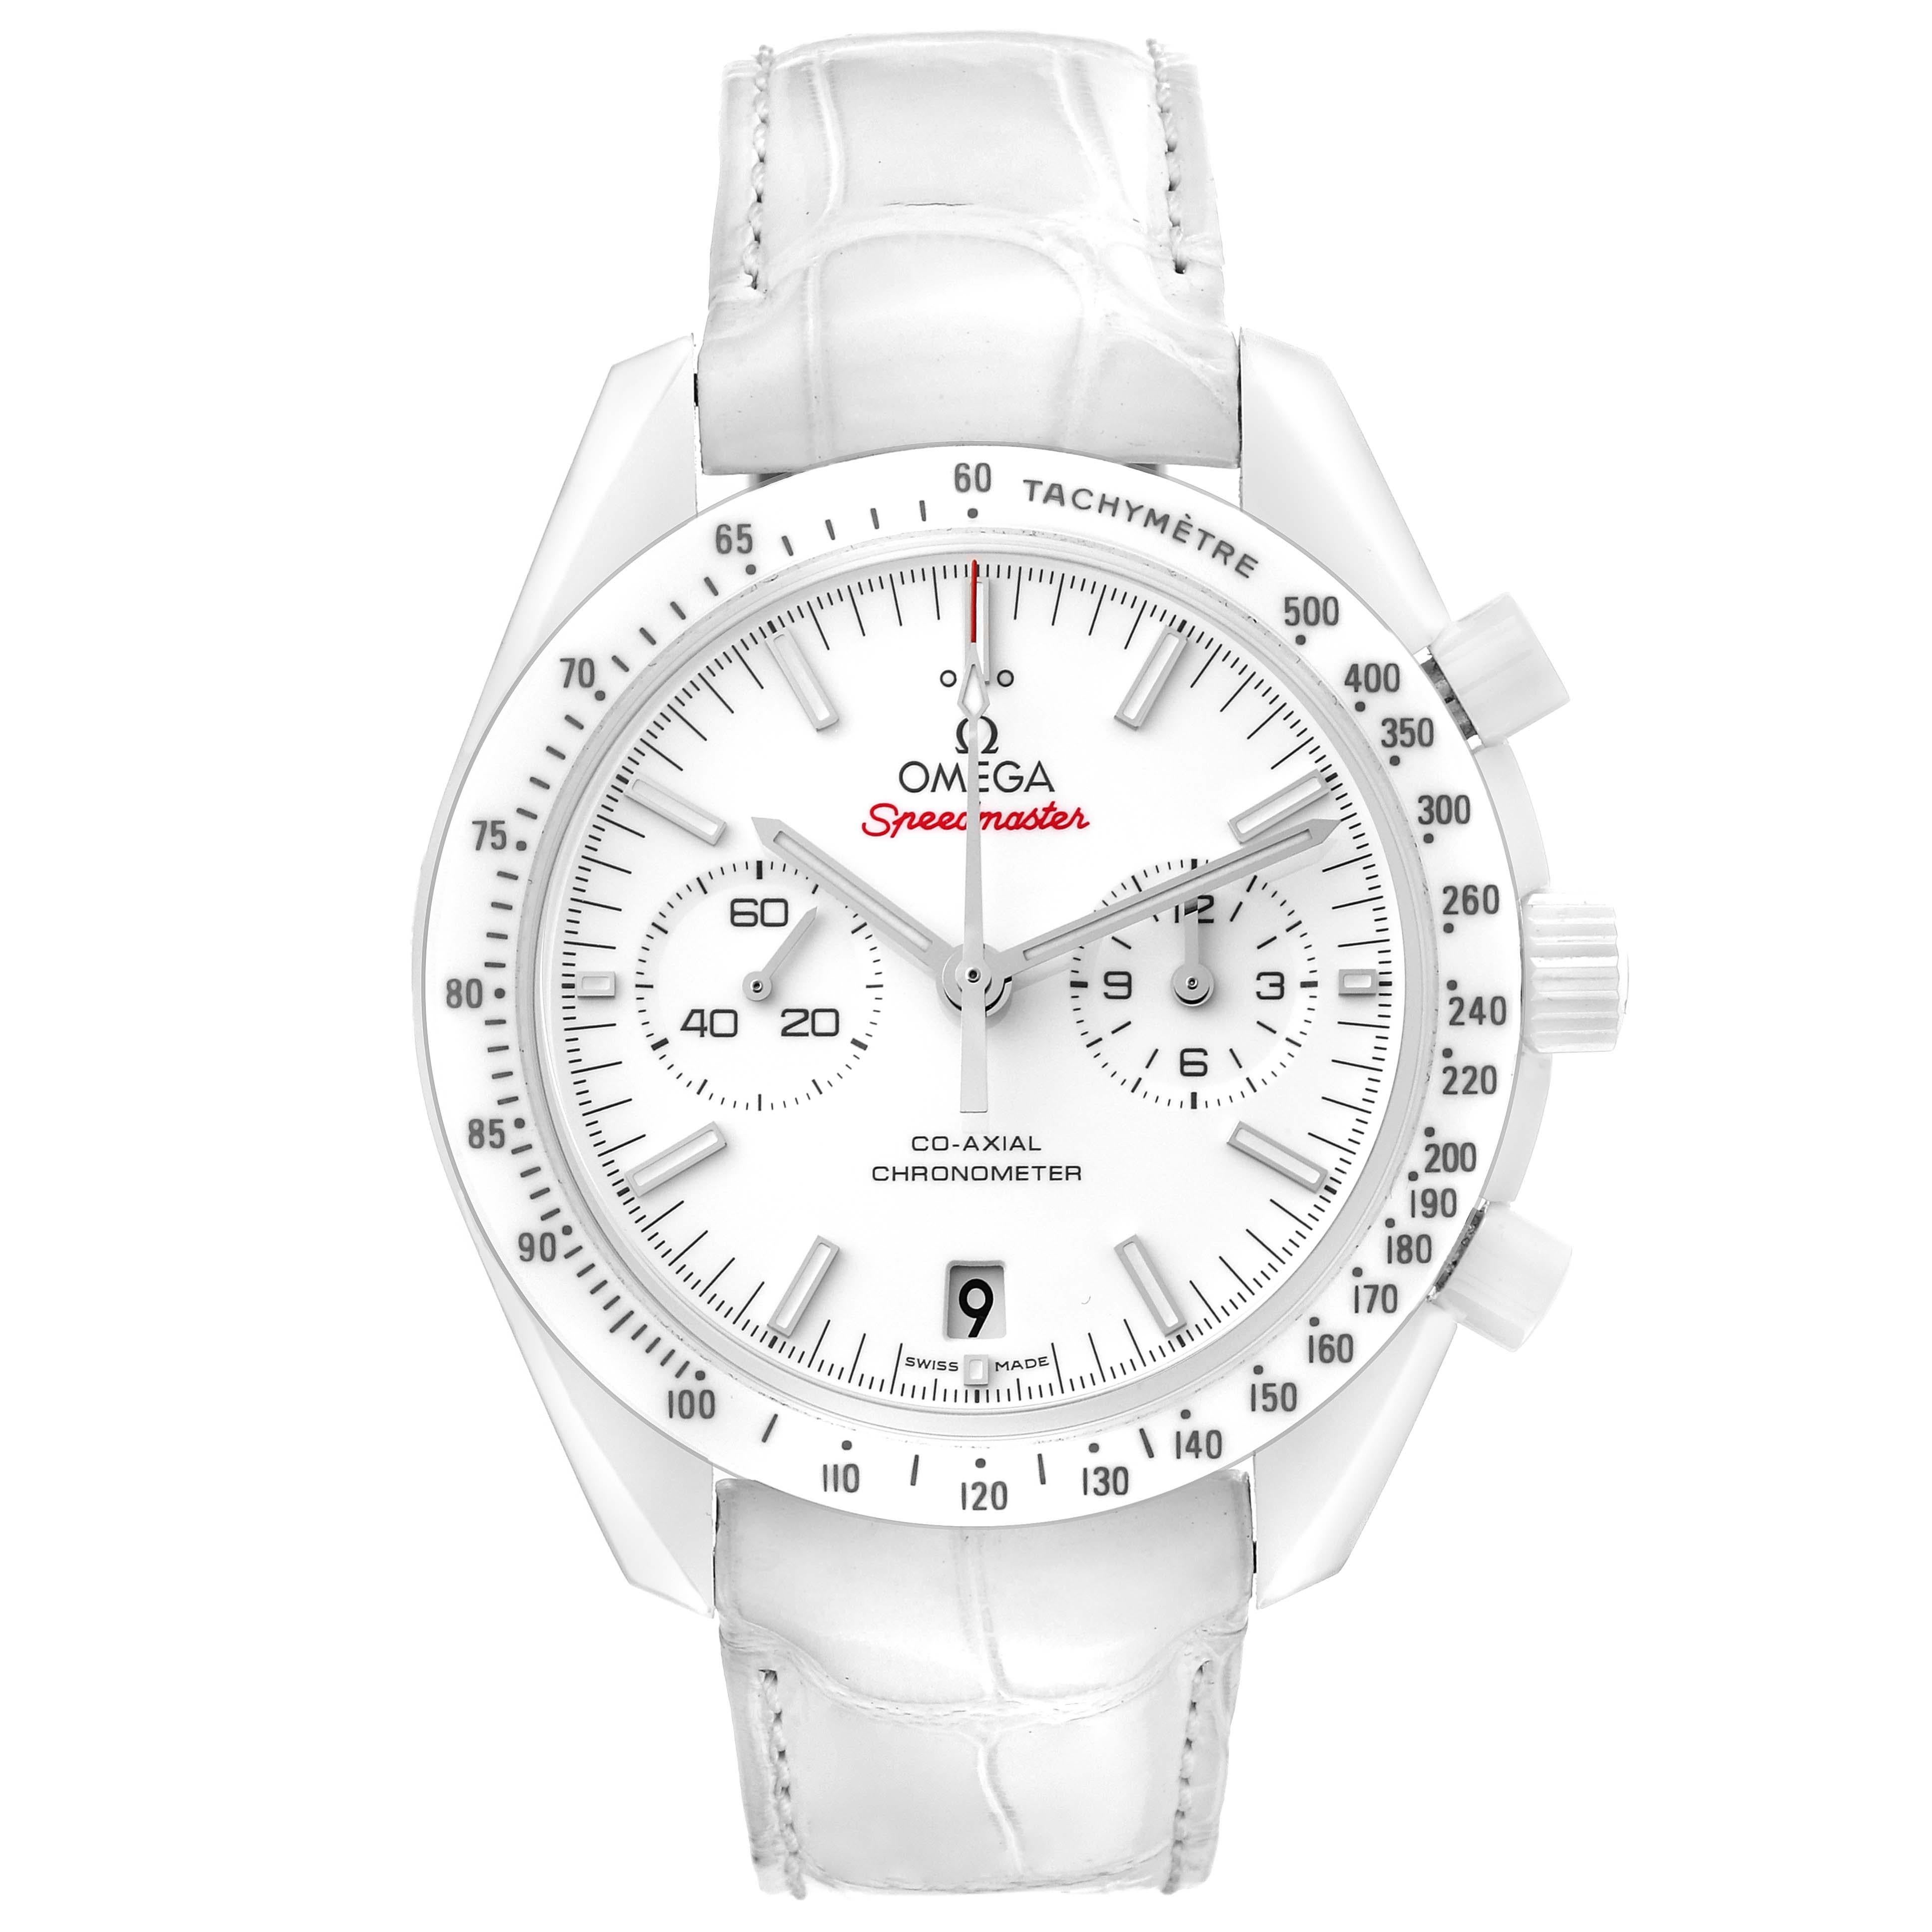 Omega Speedmaster White Side of the Moon Ceramic Mens Watch 311.93.44.51.04.002 Unworn. Automatic self-winding chronograph movement with column wheel mechanism and Co-Axial Escapement for greater precision, stability and durability of the movement.